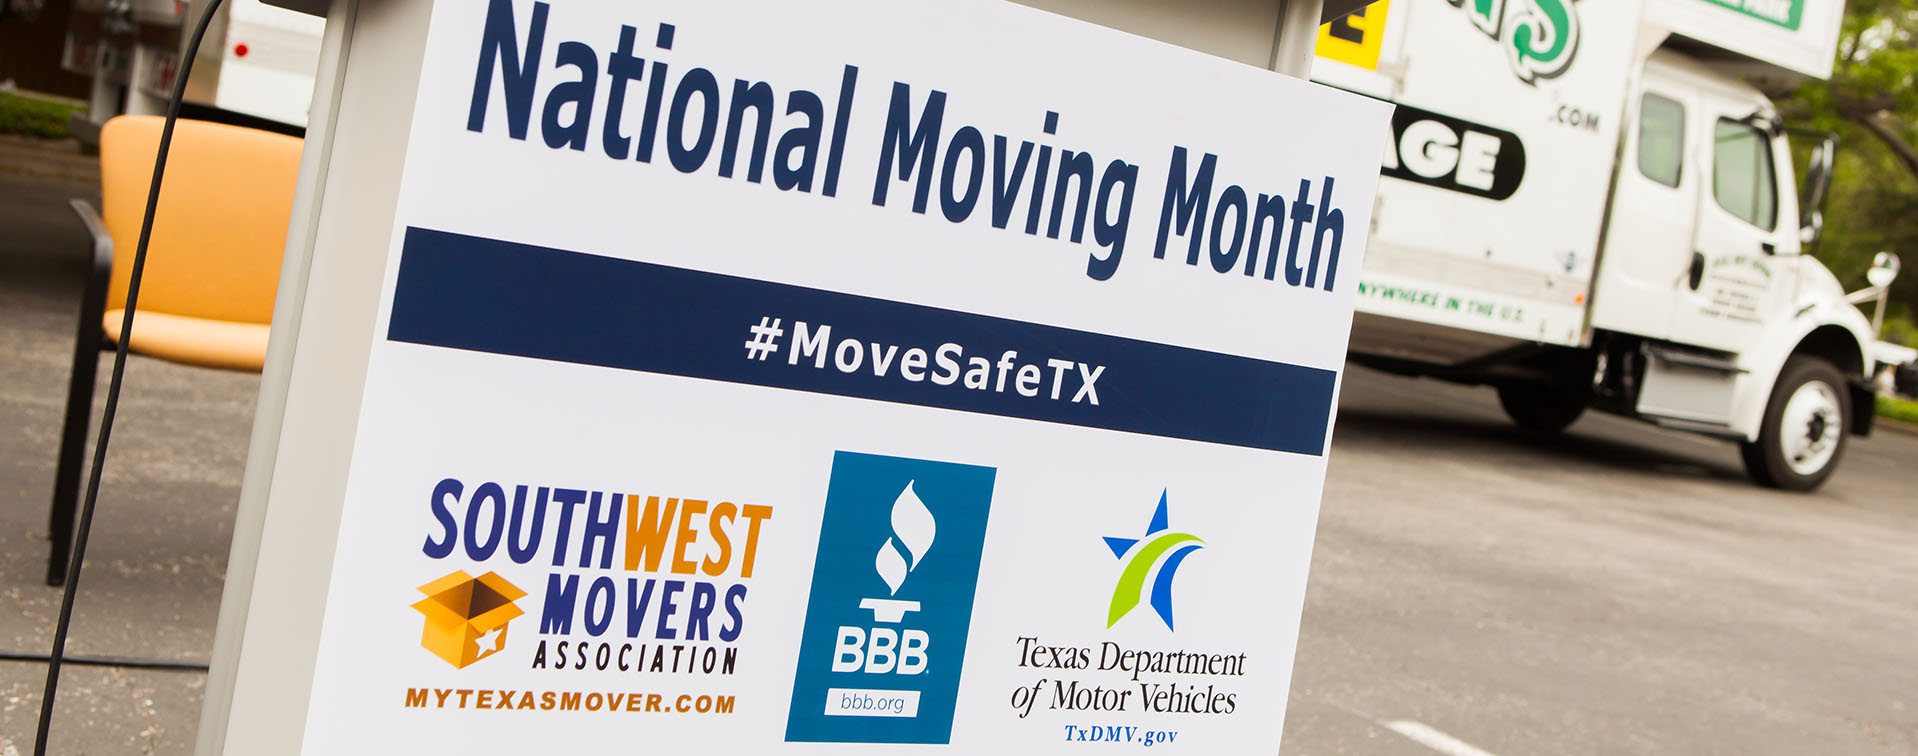 SMA National Moving Month Photo